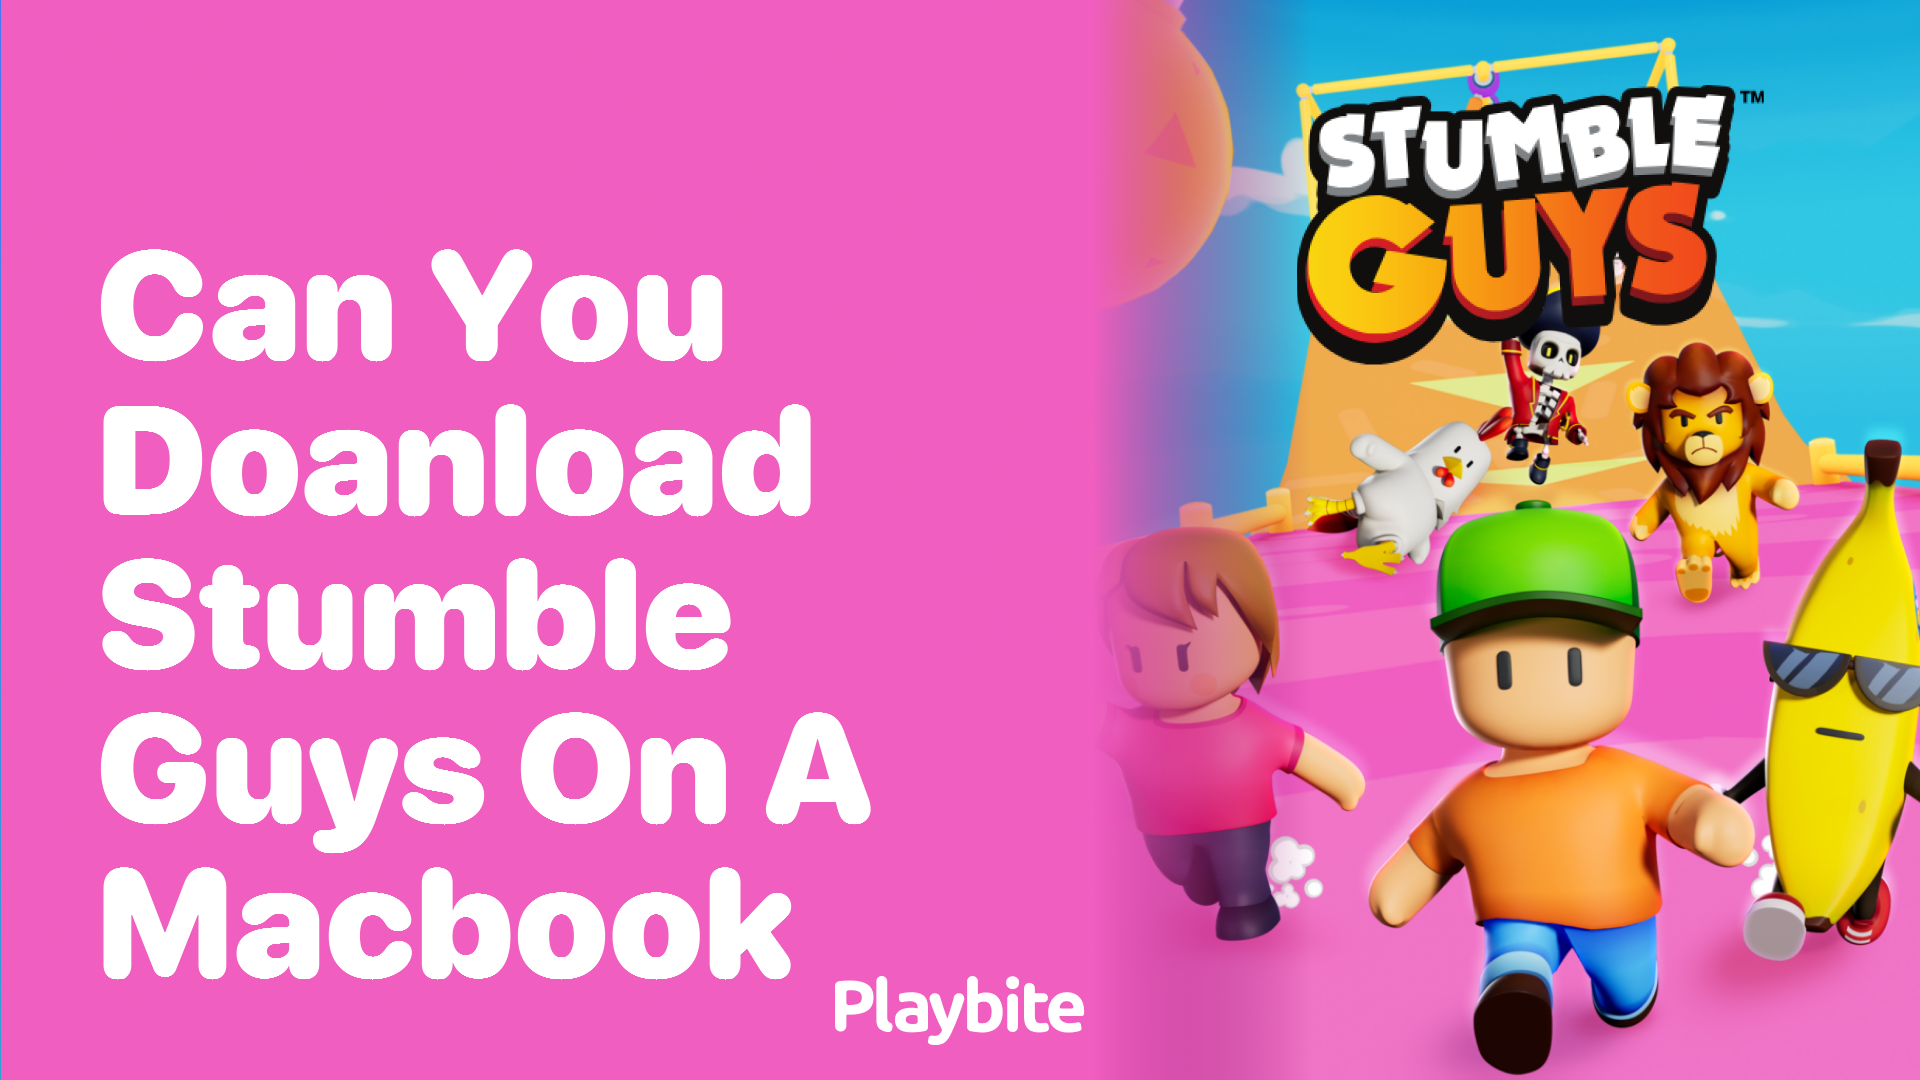 Can You Download Stumble Guys on a MacBook?